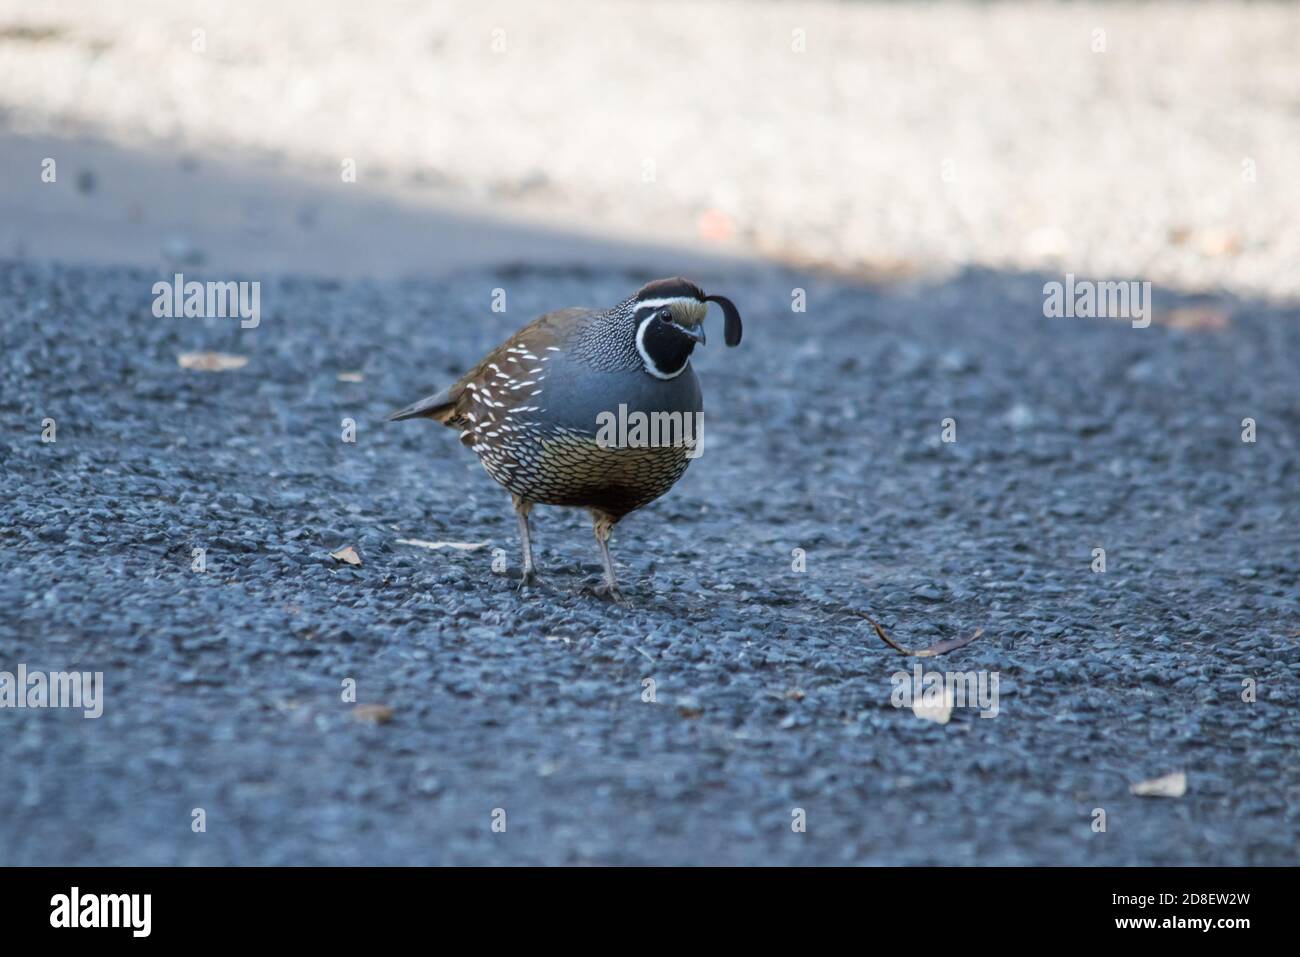 A California Quail (Callipepla californica), also known as the California Valley Quail or Valley Quail, introduced into New Zealand. Stock Photo